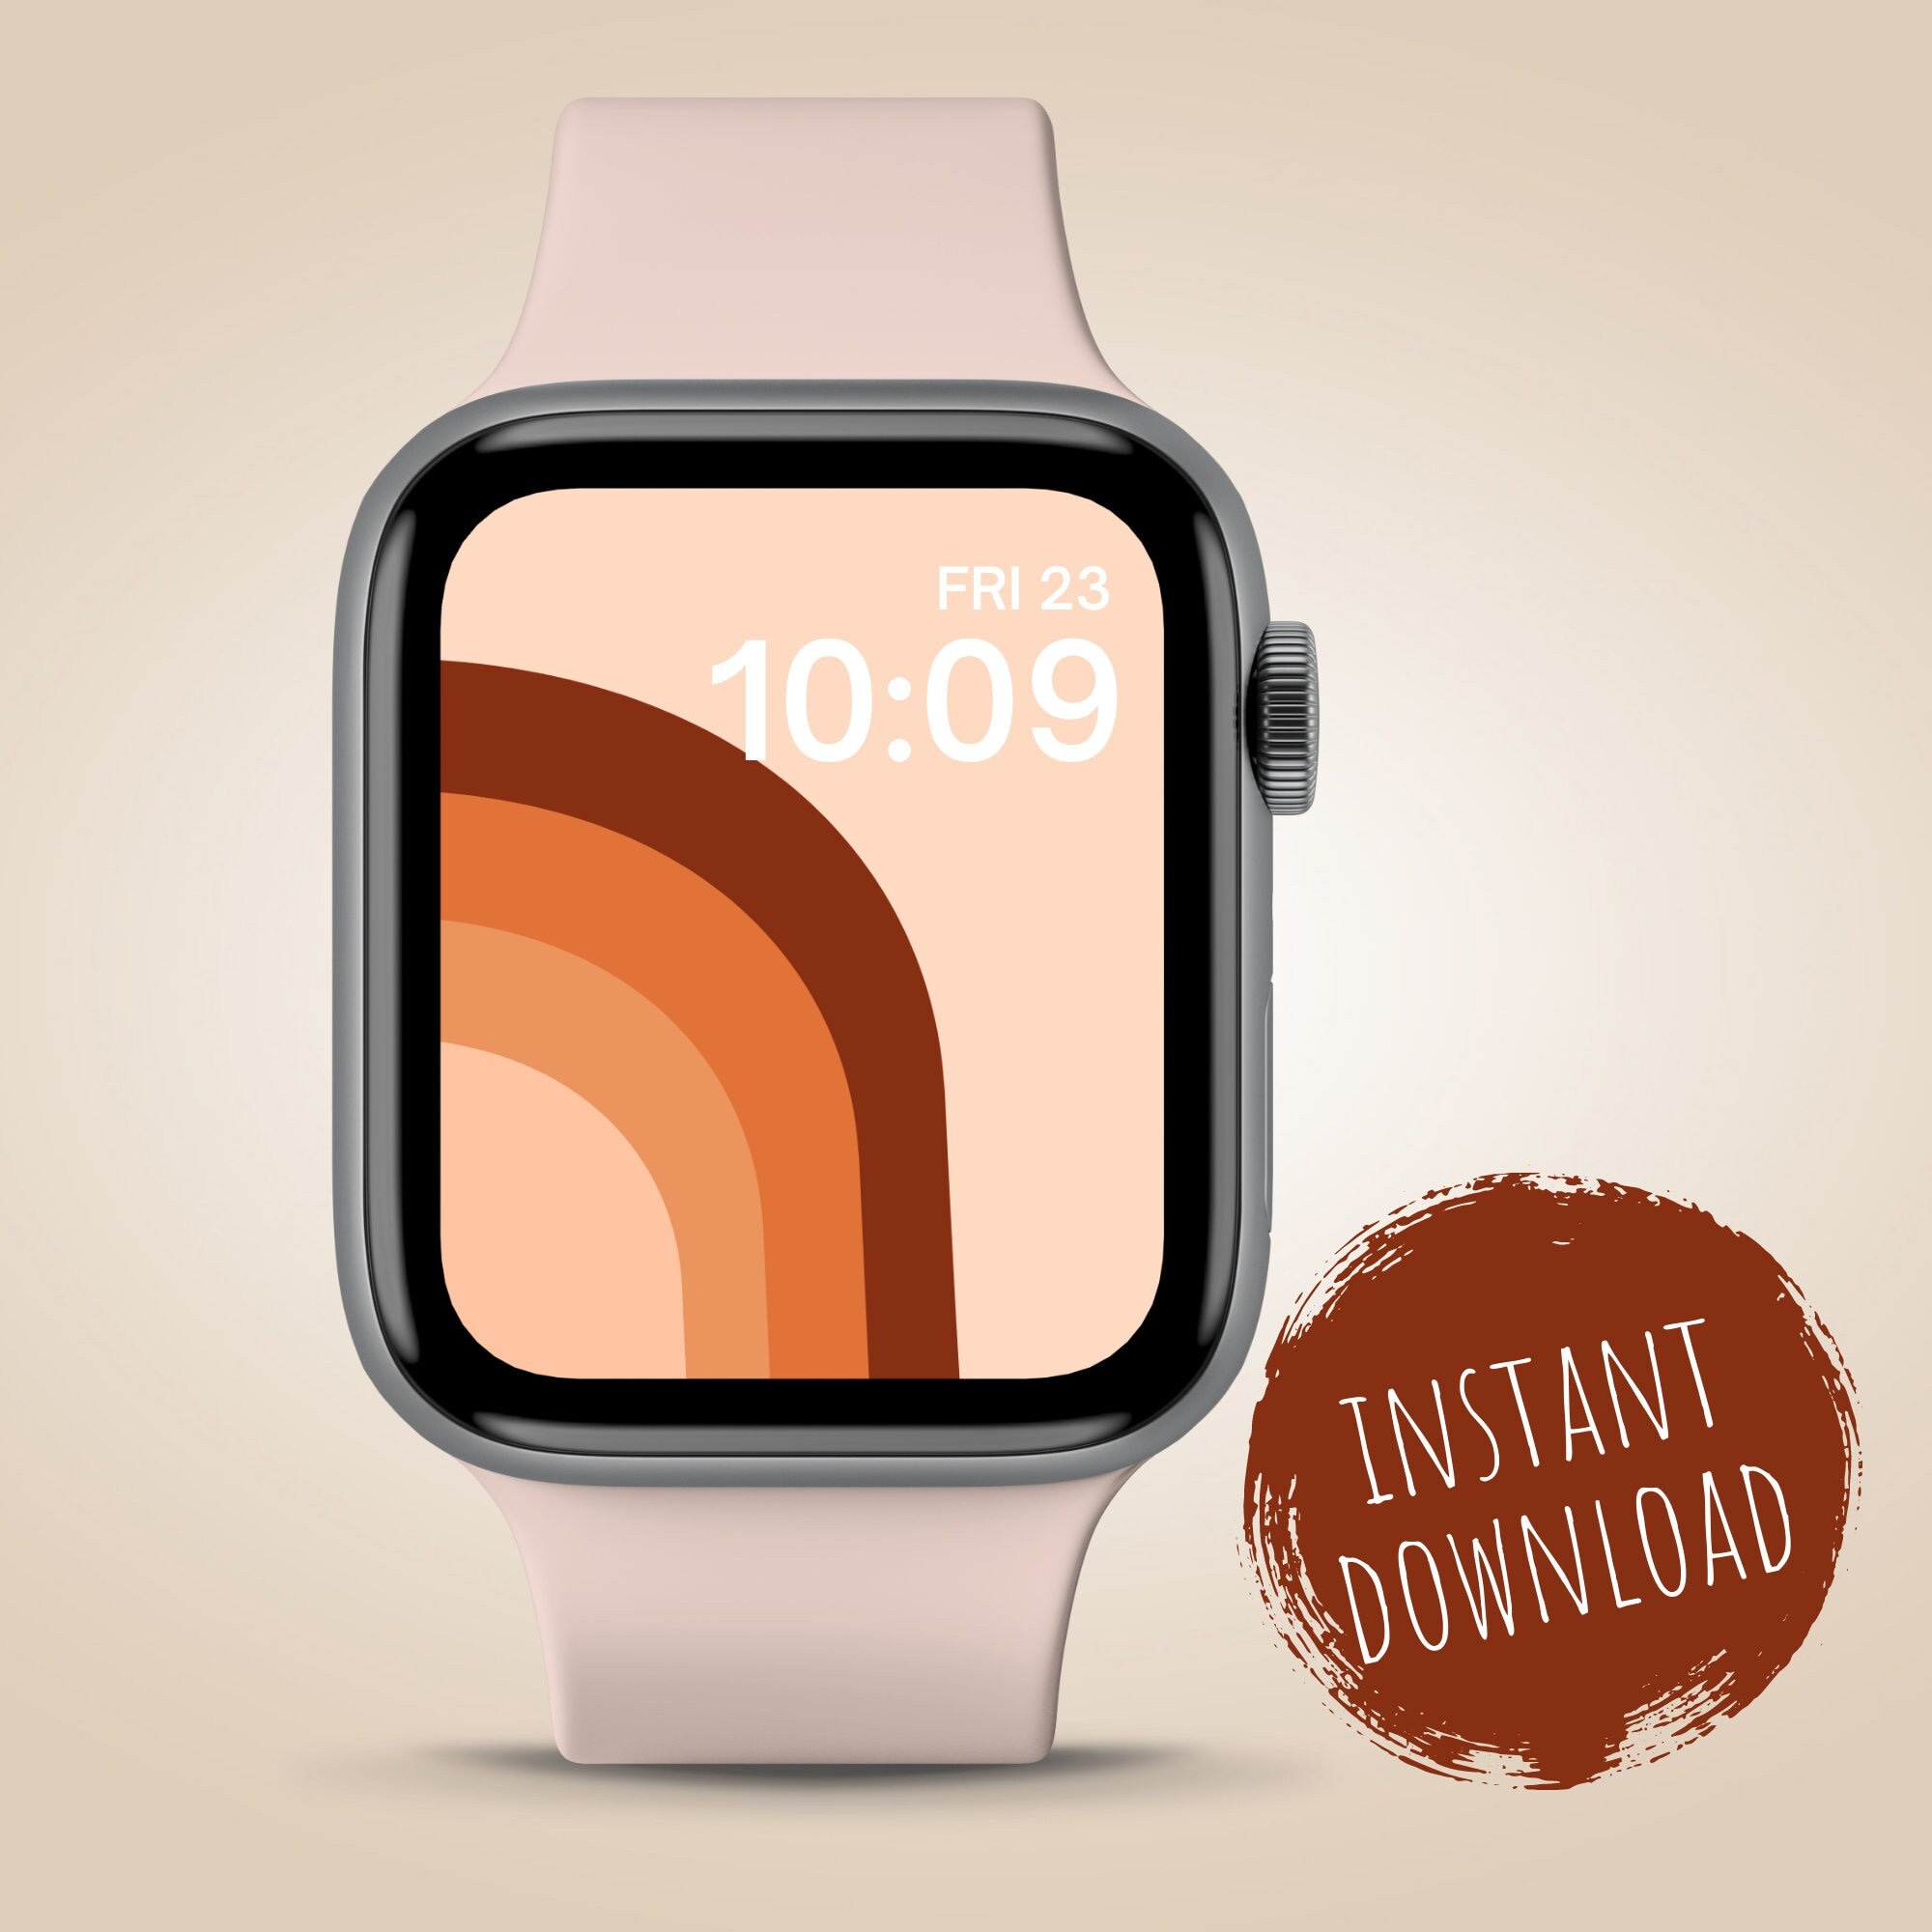 How To Change The Wallpaper On Your Android Watch – ThemeBin